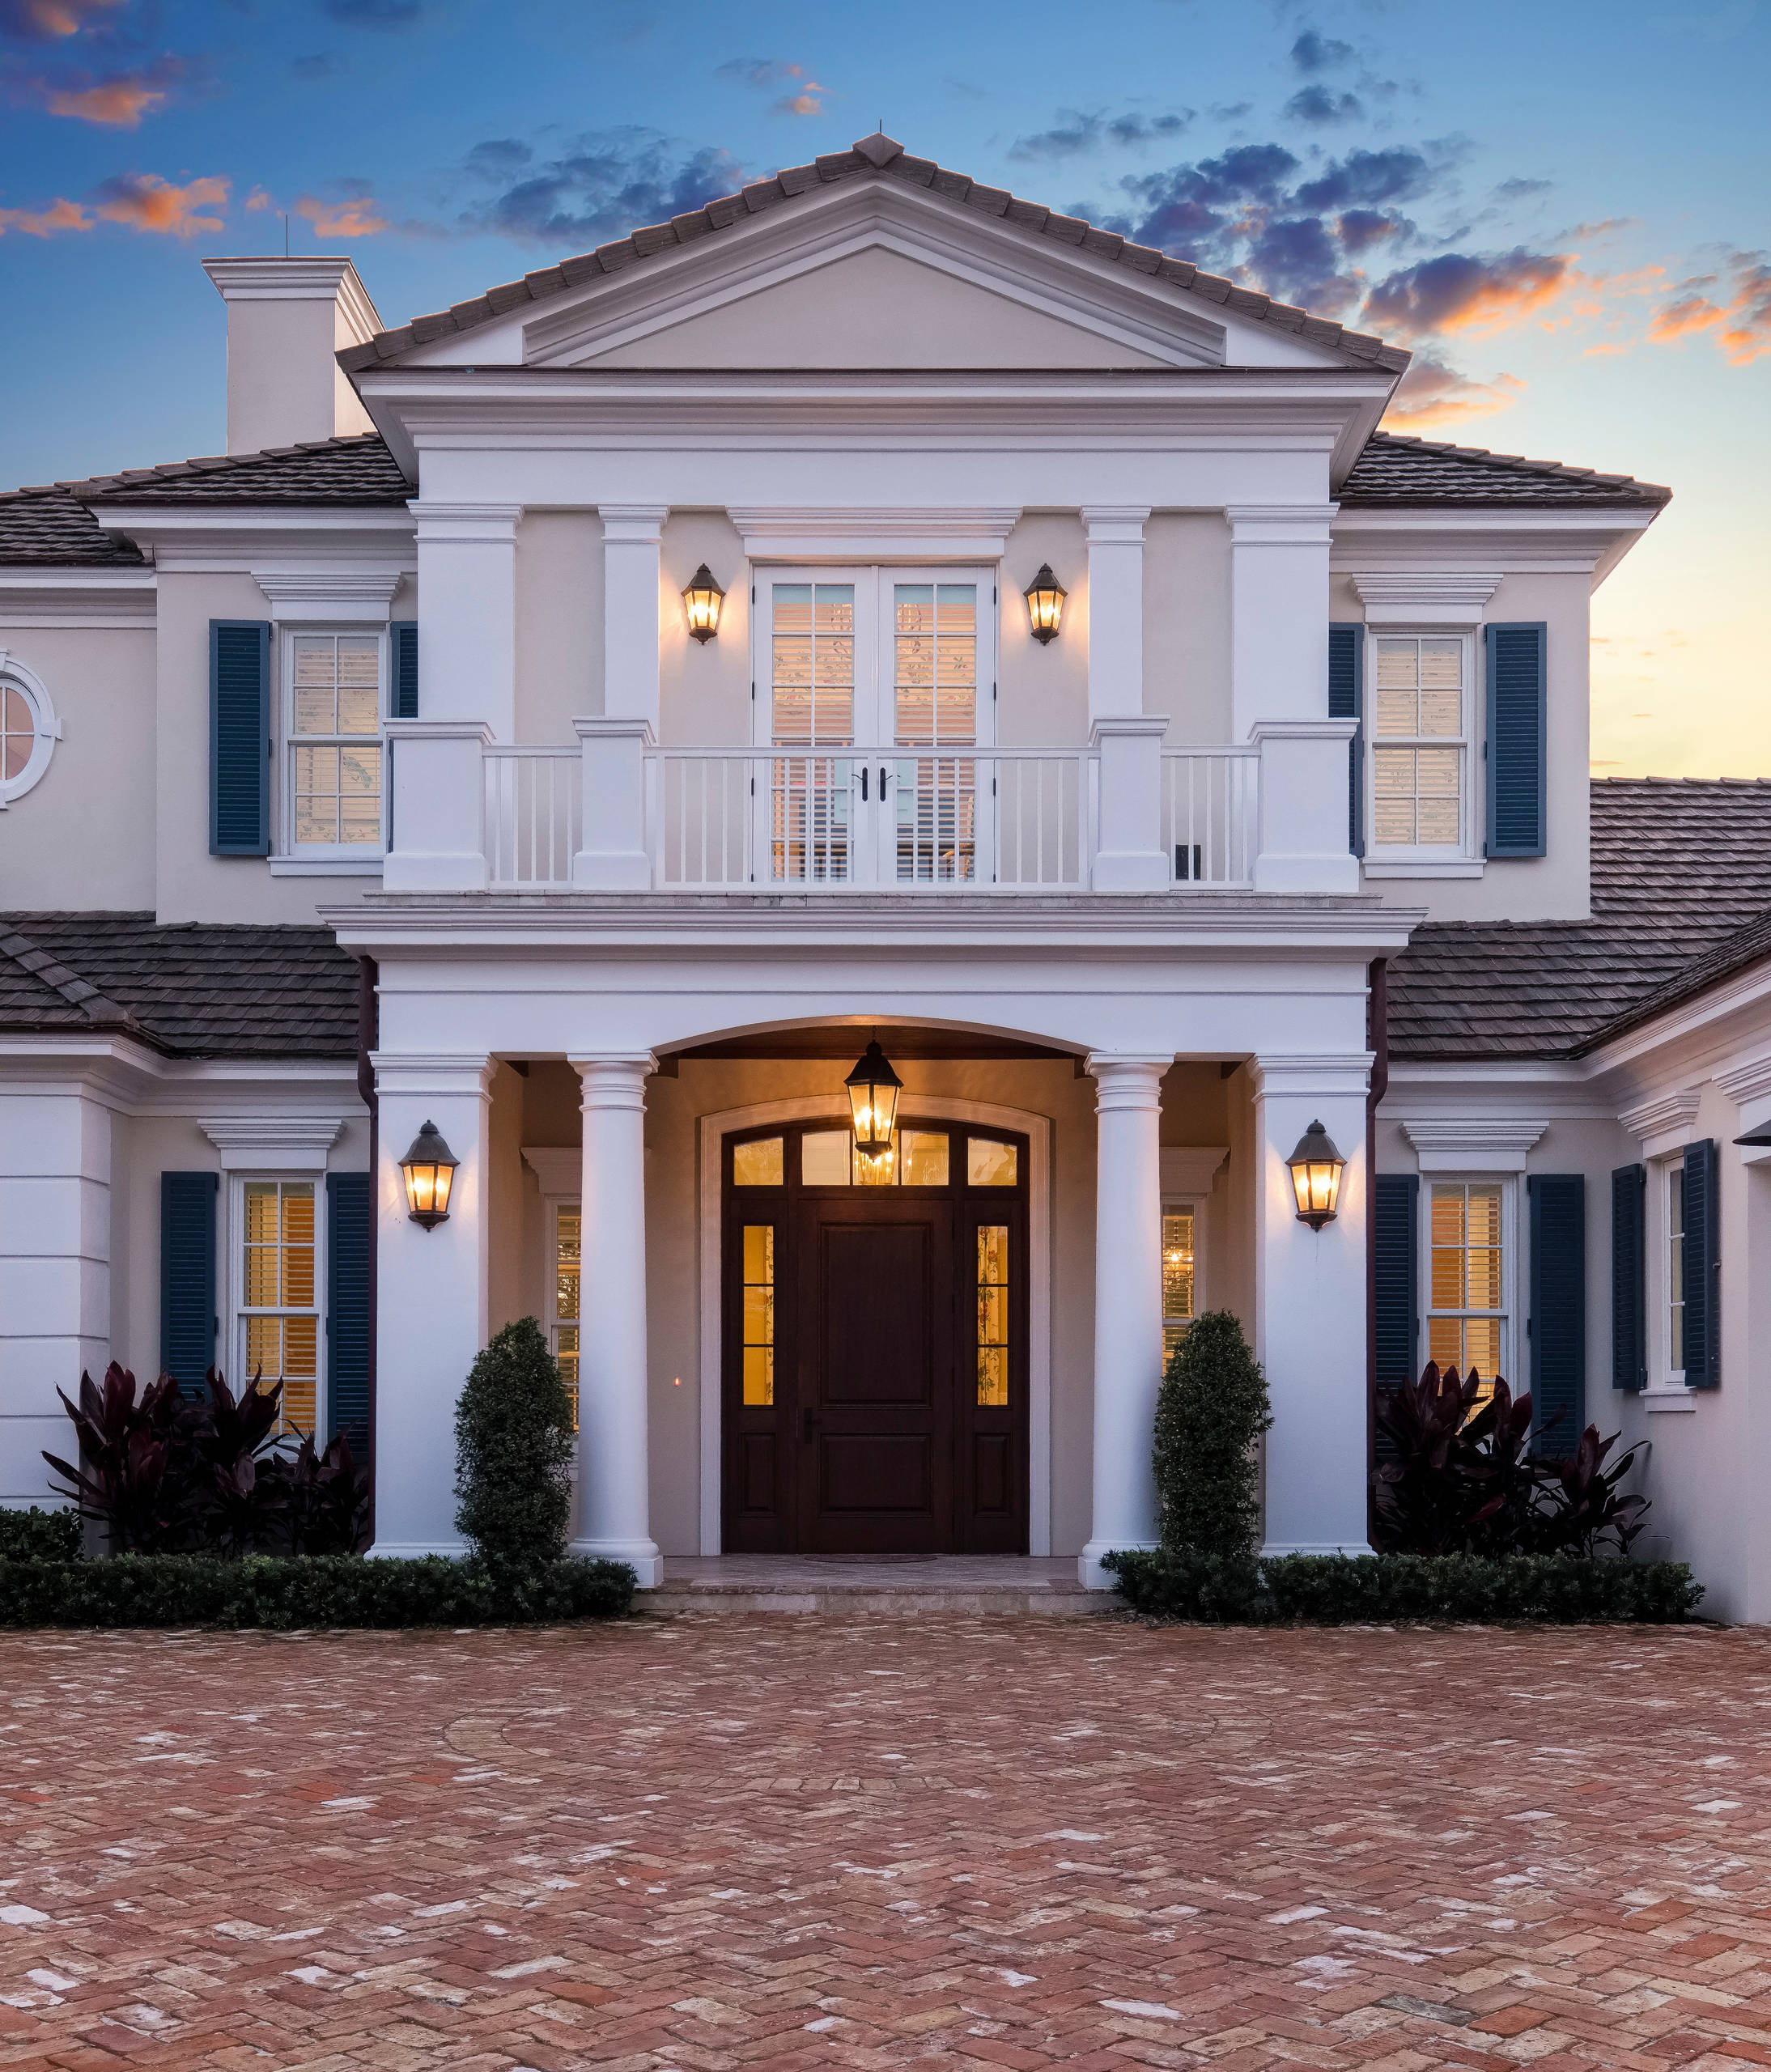 Lost Tree Luxury - Traditional - Exterior - Other - By Joy R. Dabill  Interior Design | Houzz